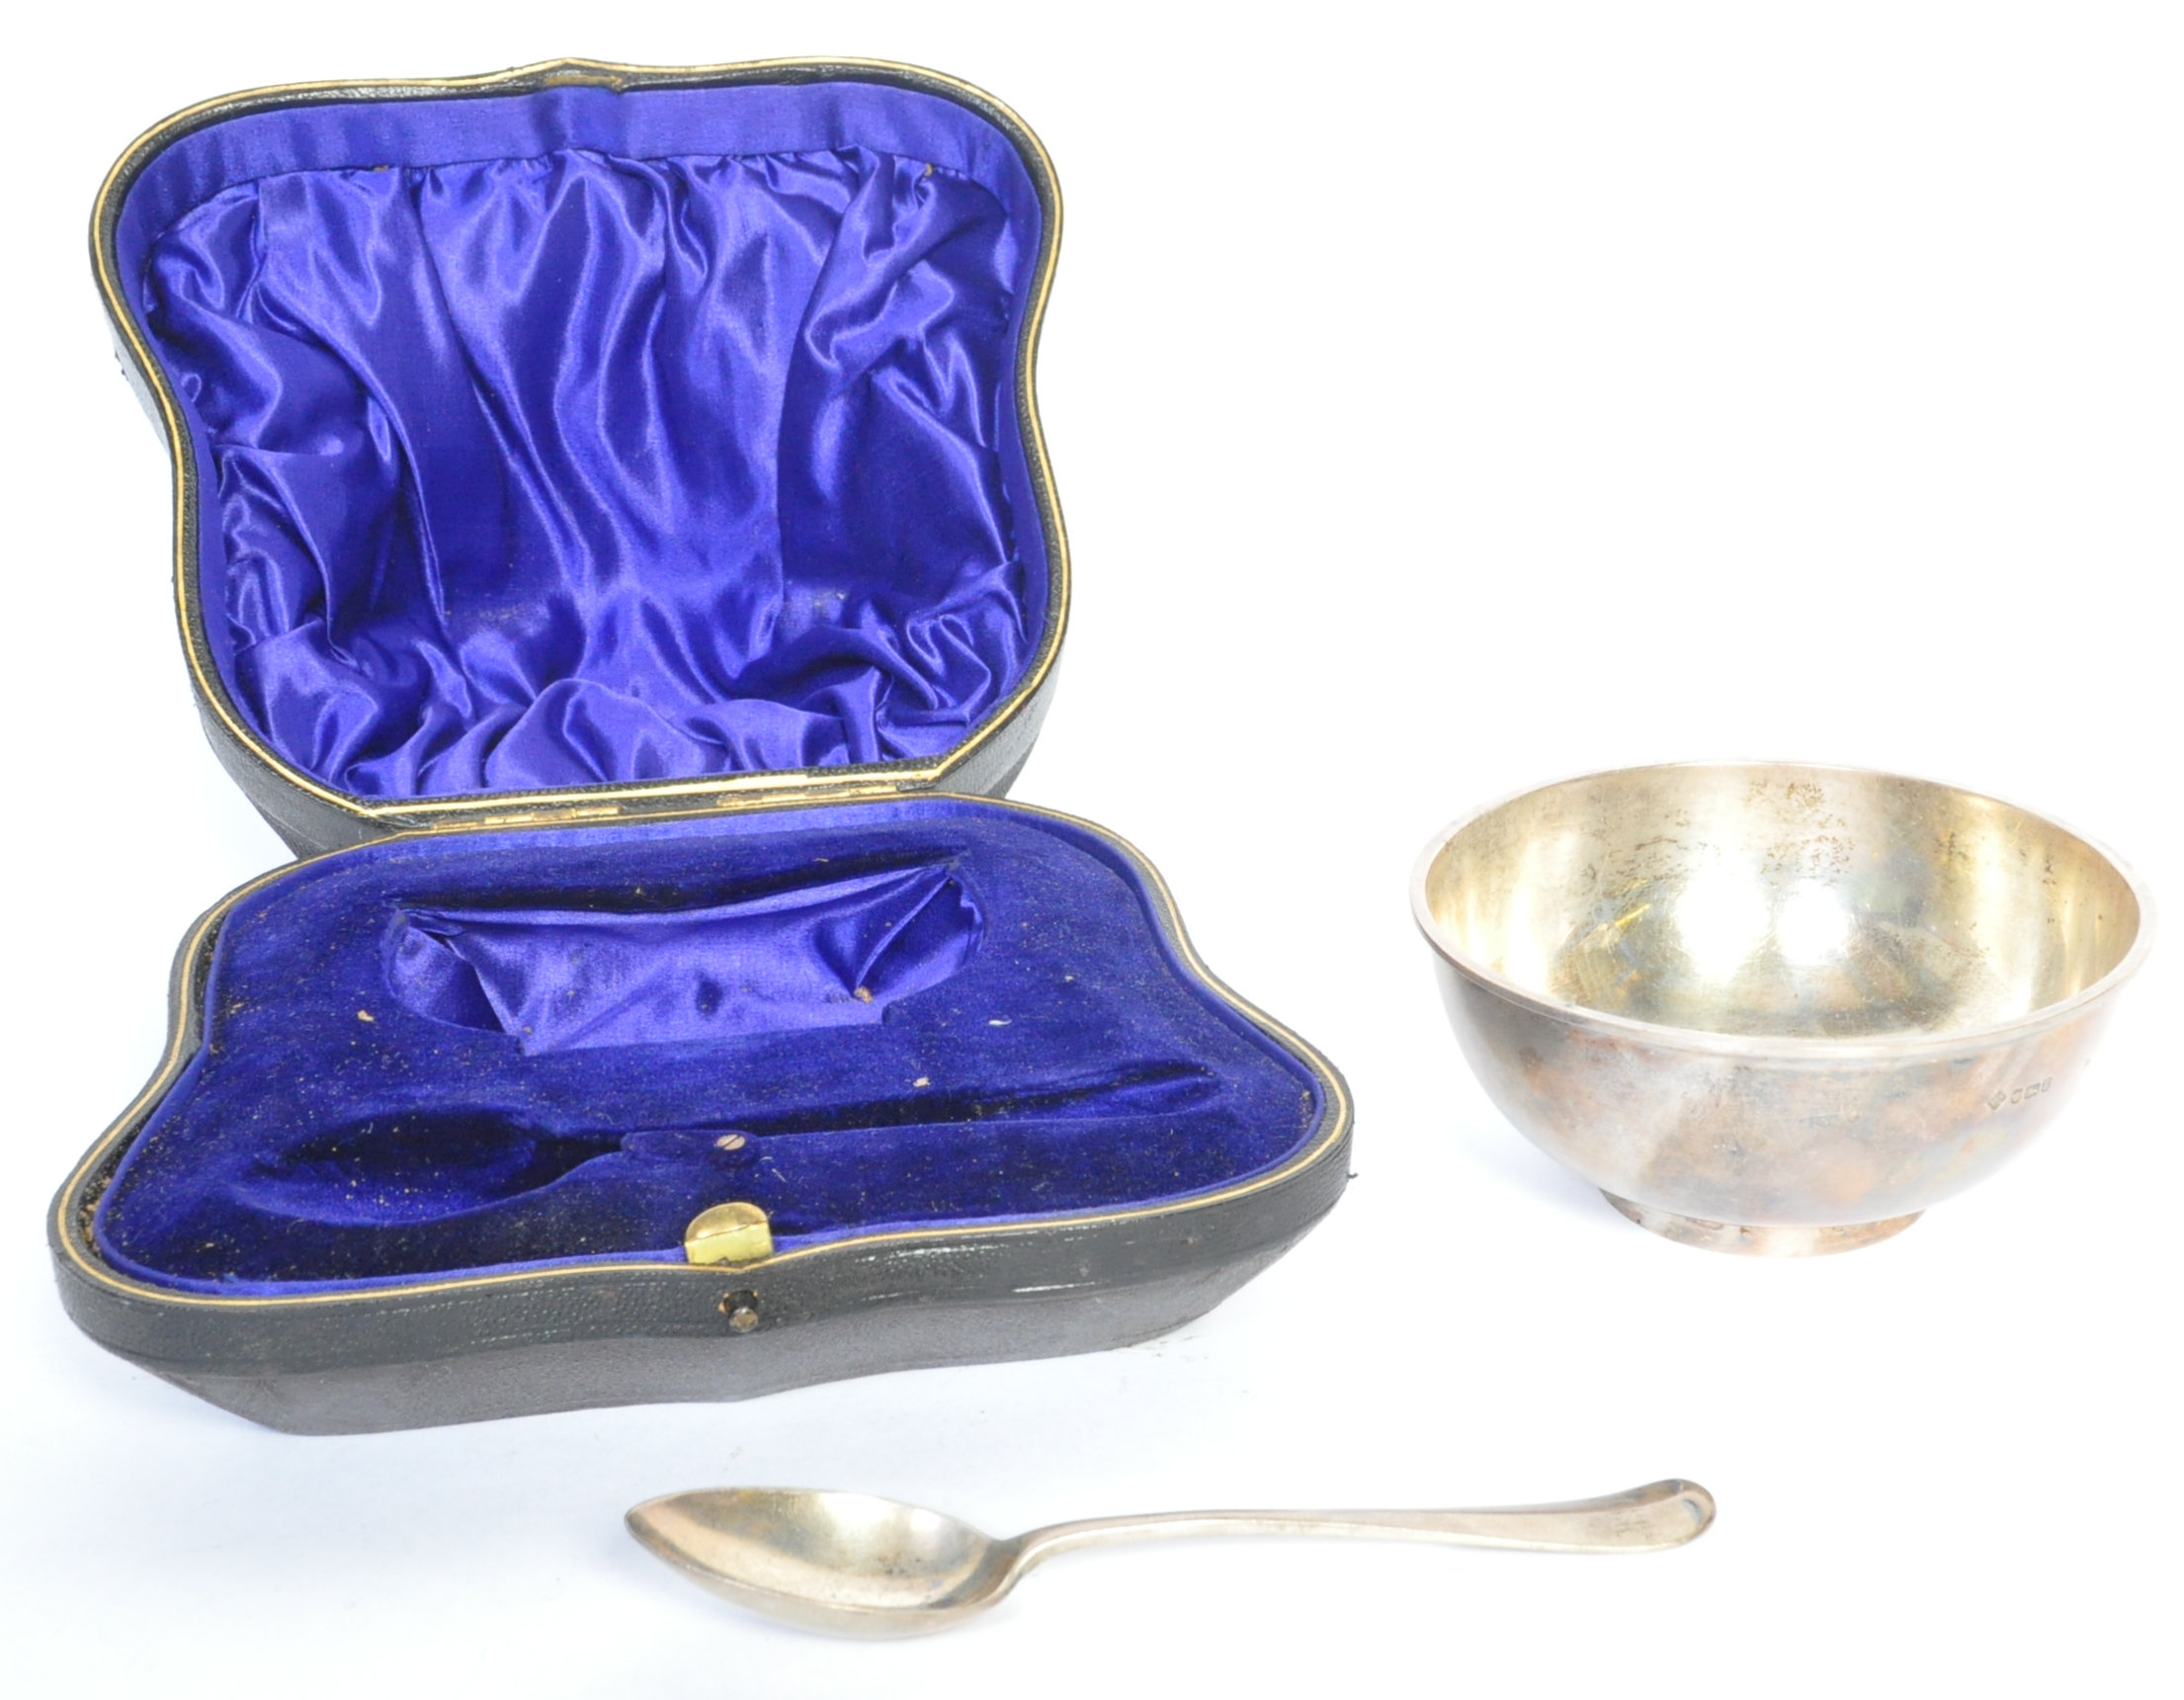 SILVER HALLMARKED CASED CHRISTENING BOWL & SPOON SET - Image 5 of 11